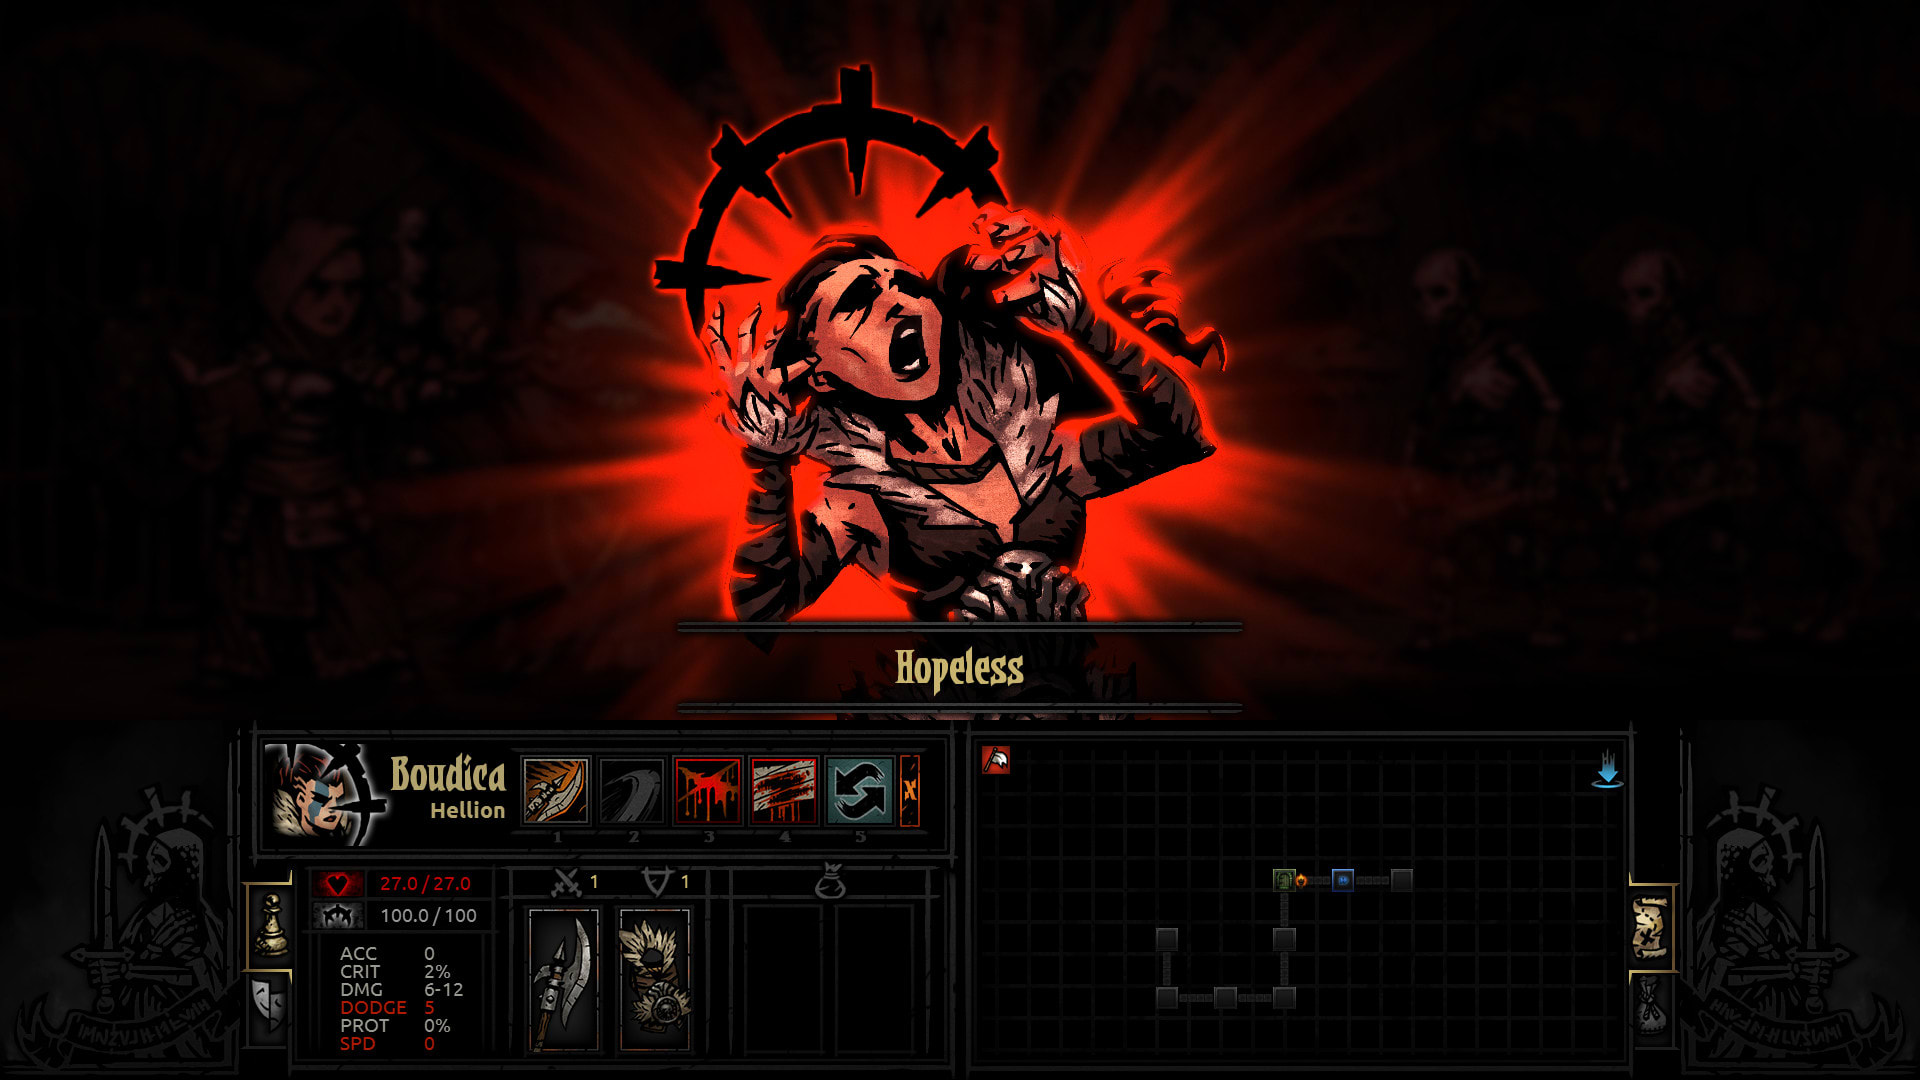 Darkest Dungeon screenshot of a character losing their sanity.